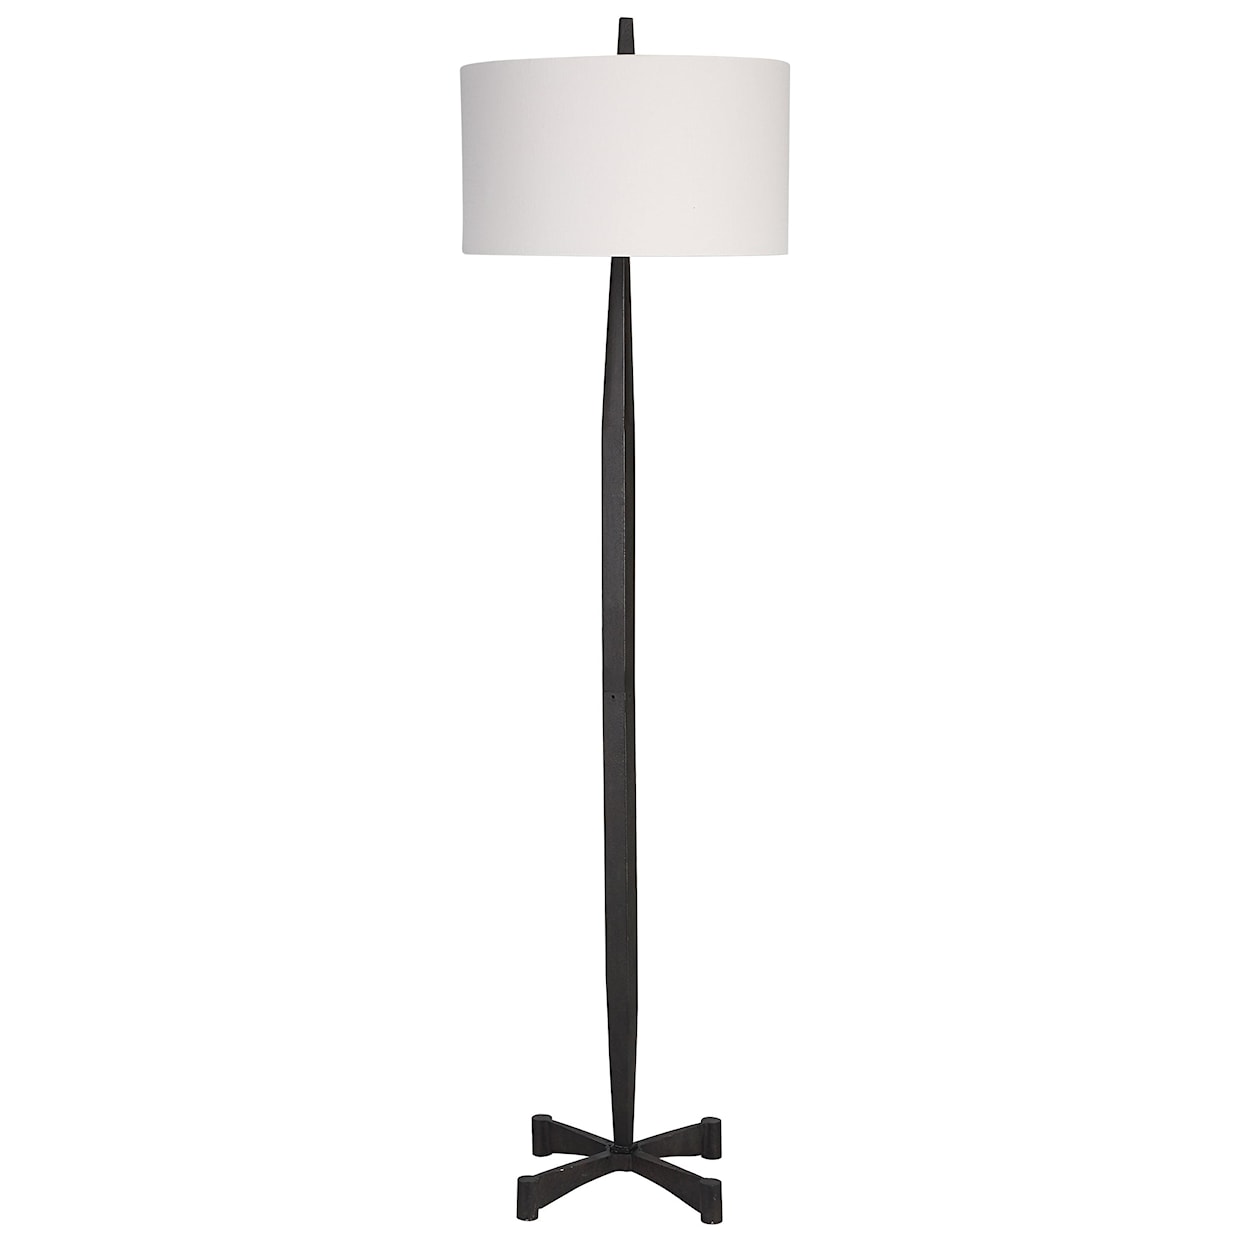 Uttermost Counteract Rust Metal Floor Lamp with Tapered Base